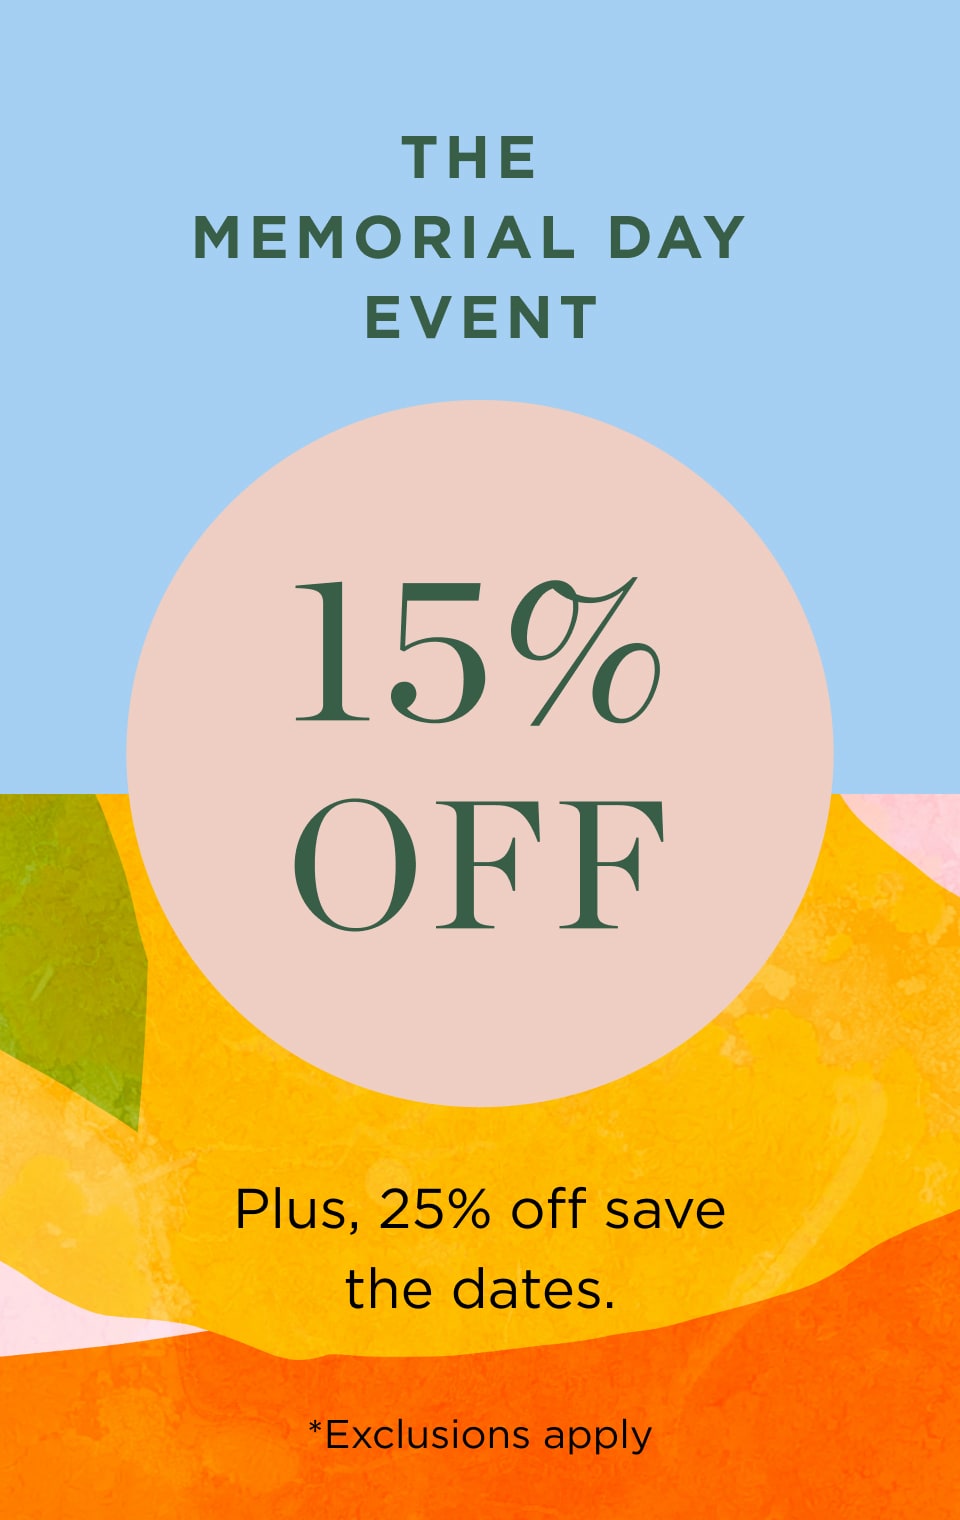 15% off sitewide*, 25% off save the dates